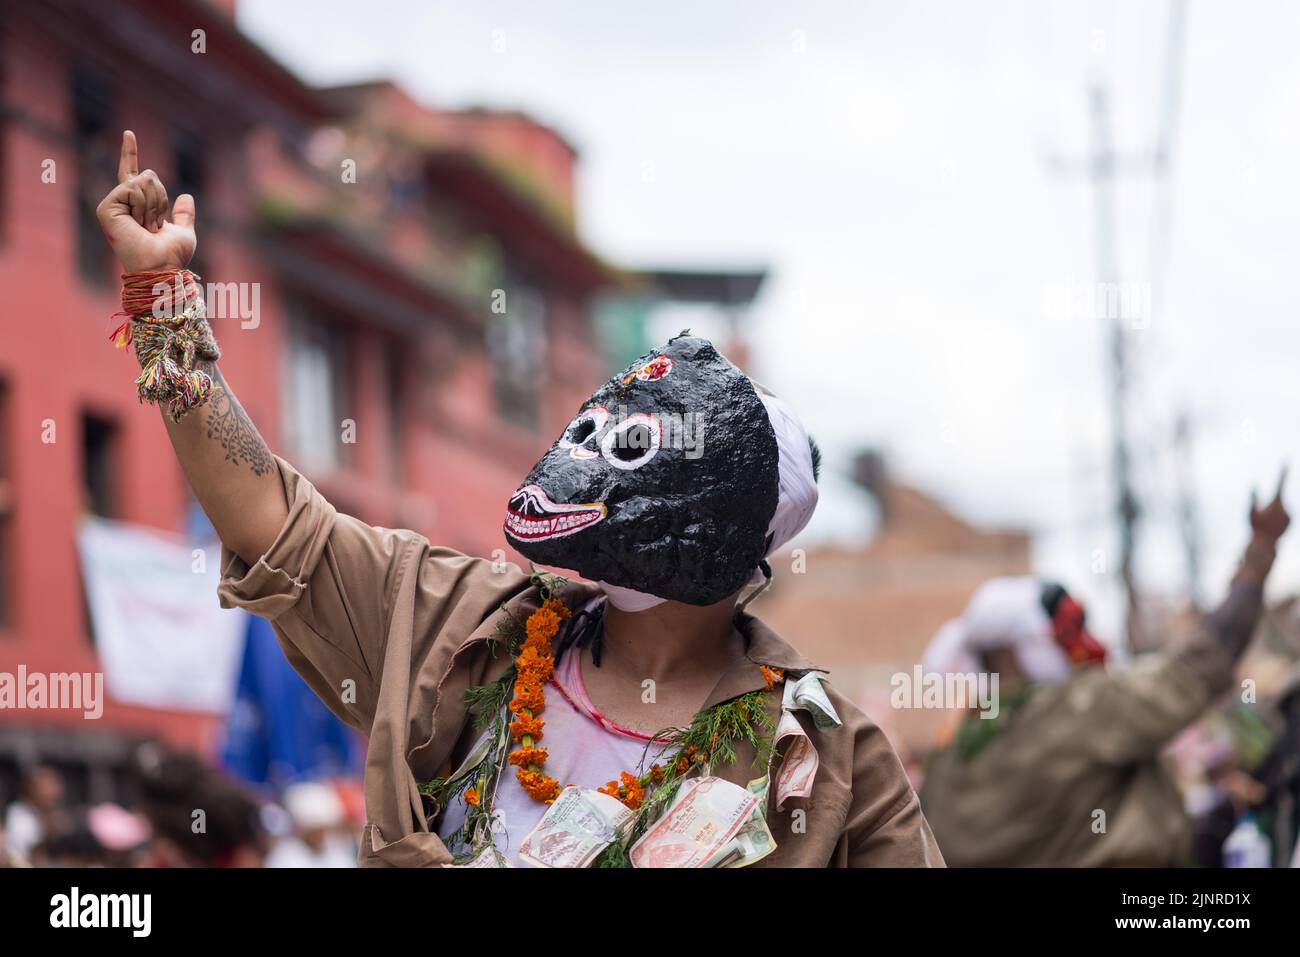 A man dressed in a traditional costume performs a holy dance during the festival. People celebrate Gai Jatra or cow festival in memory of the departed souls in the past year for salvation and peace. It is believed that cows guide the departed souls to cross the river to get to heaven. Stock Photo